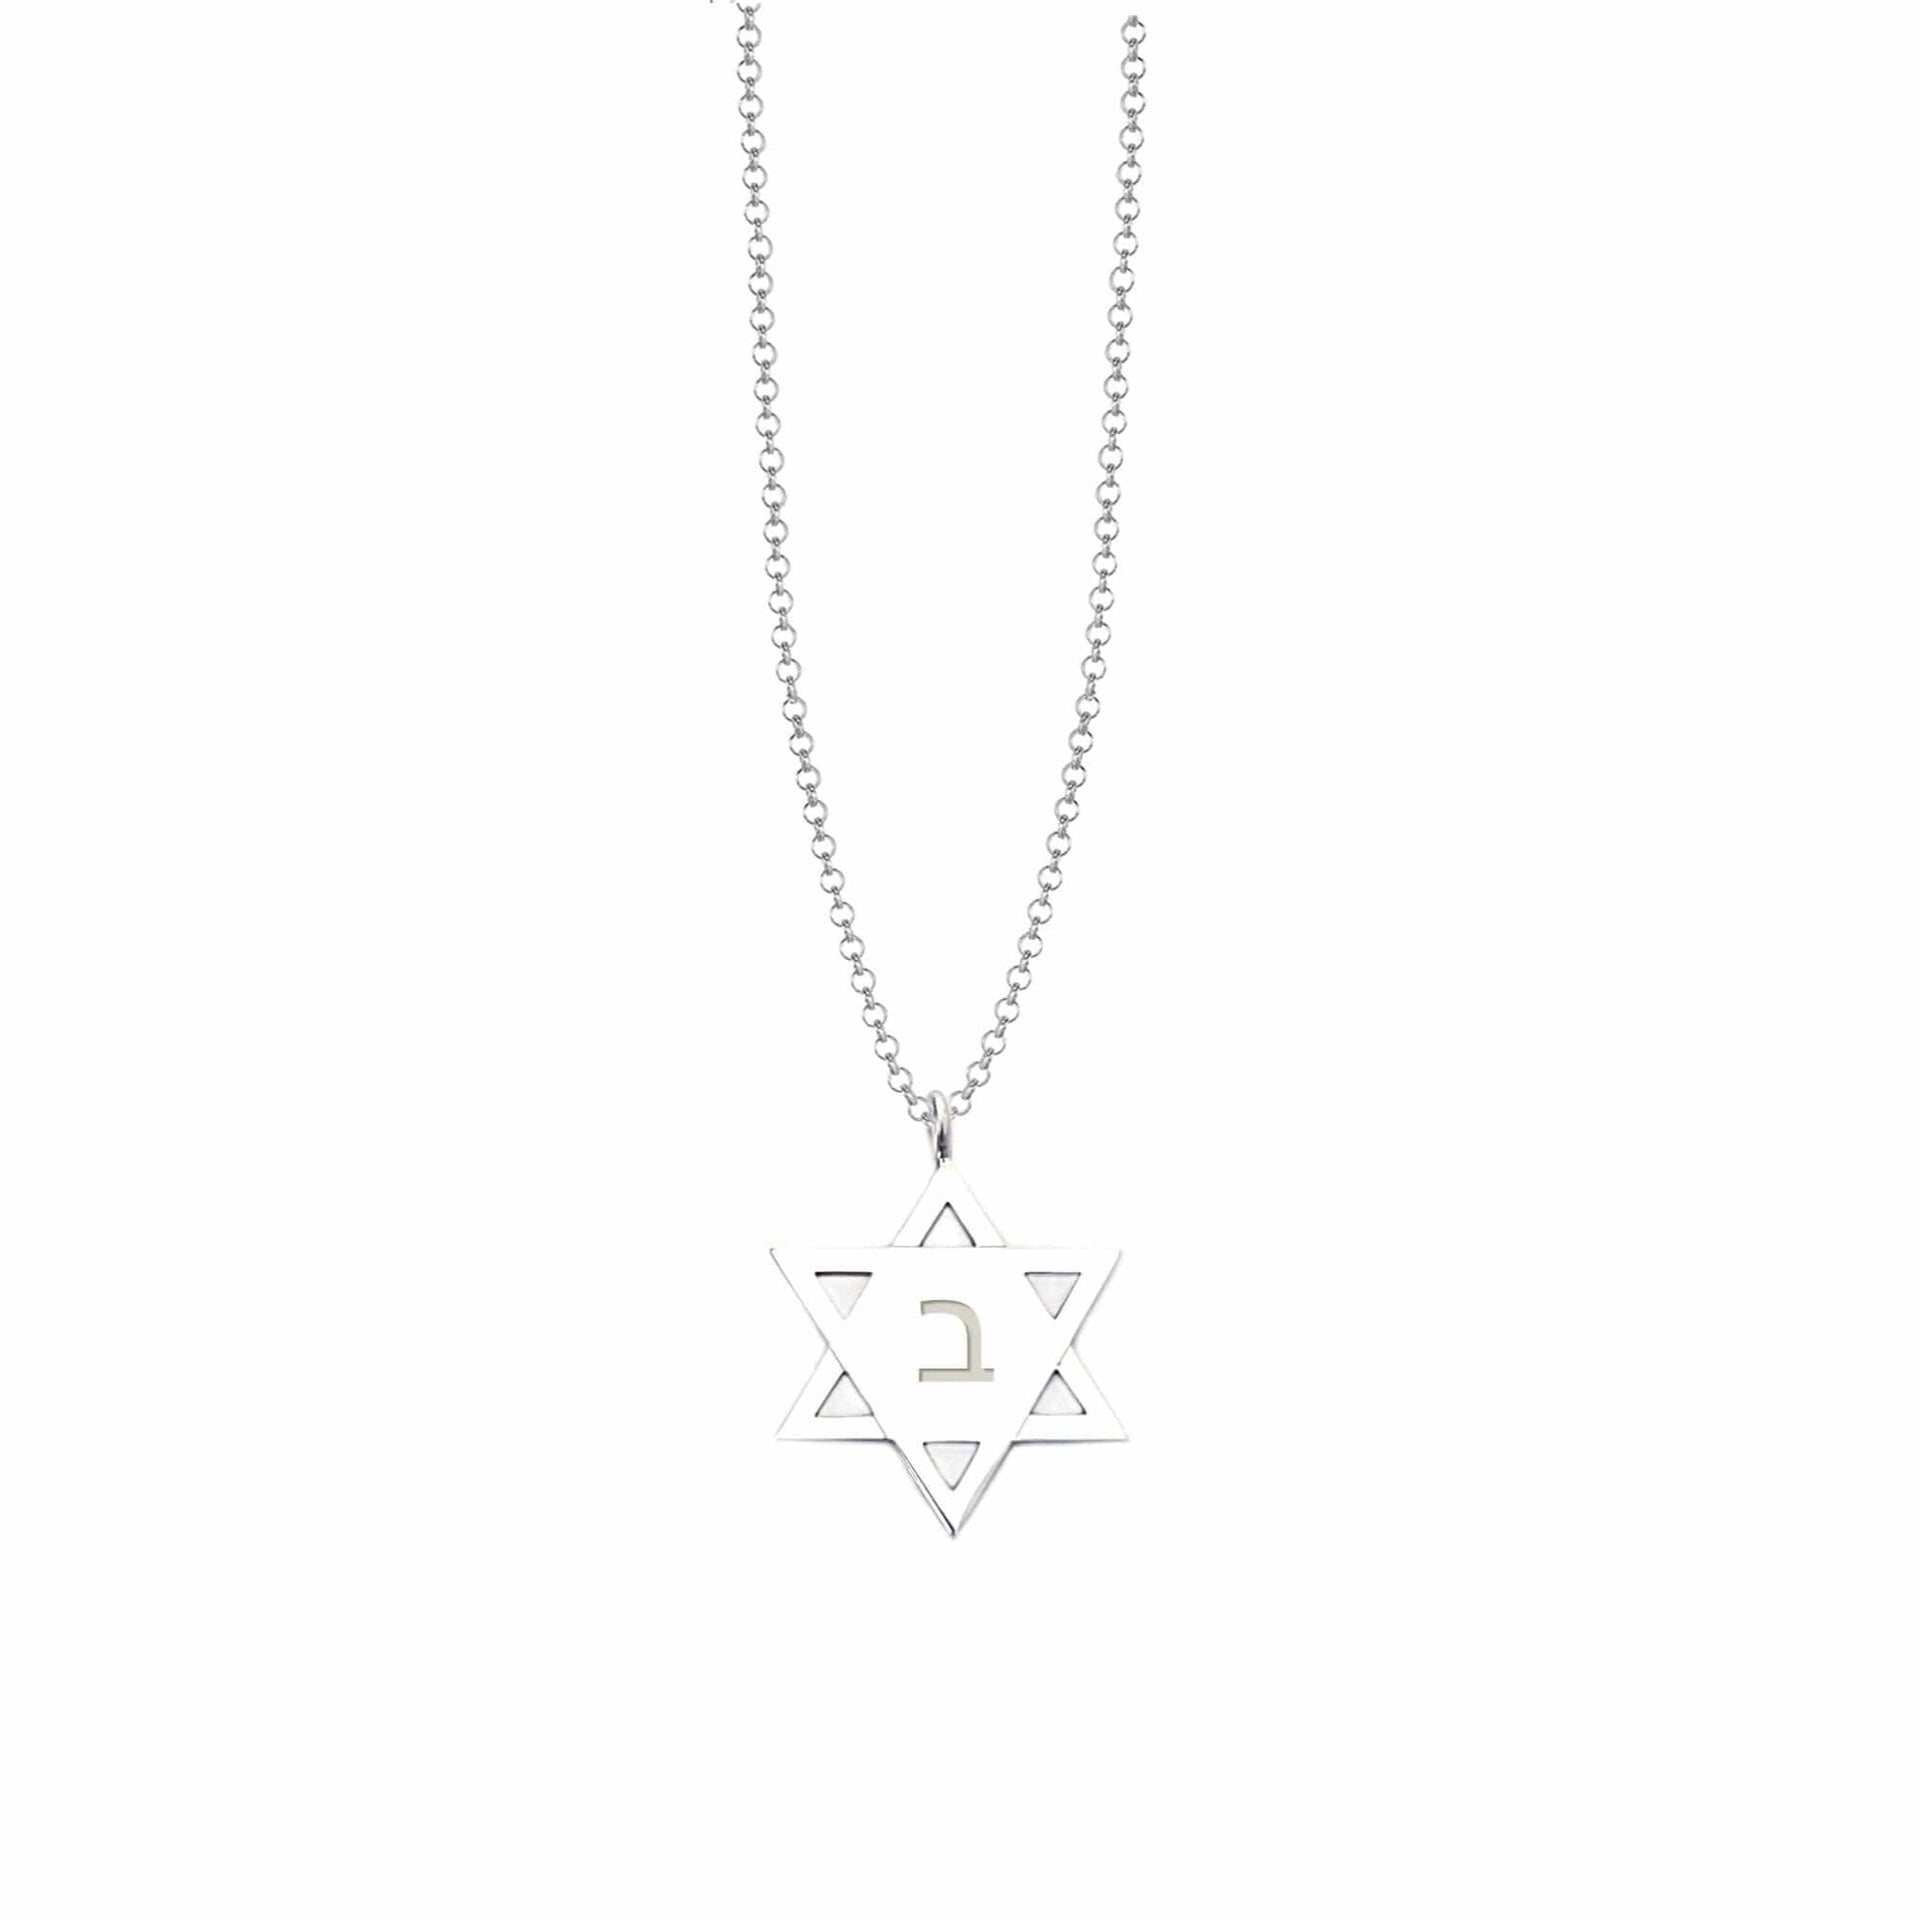 Miriam Merenfeld Jewelry Necklaces Mijael Star of David Necklace - Sterling Silver, Gold Vermeil or Two-Tone